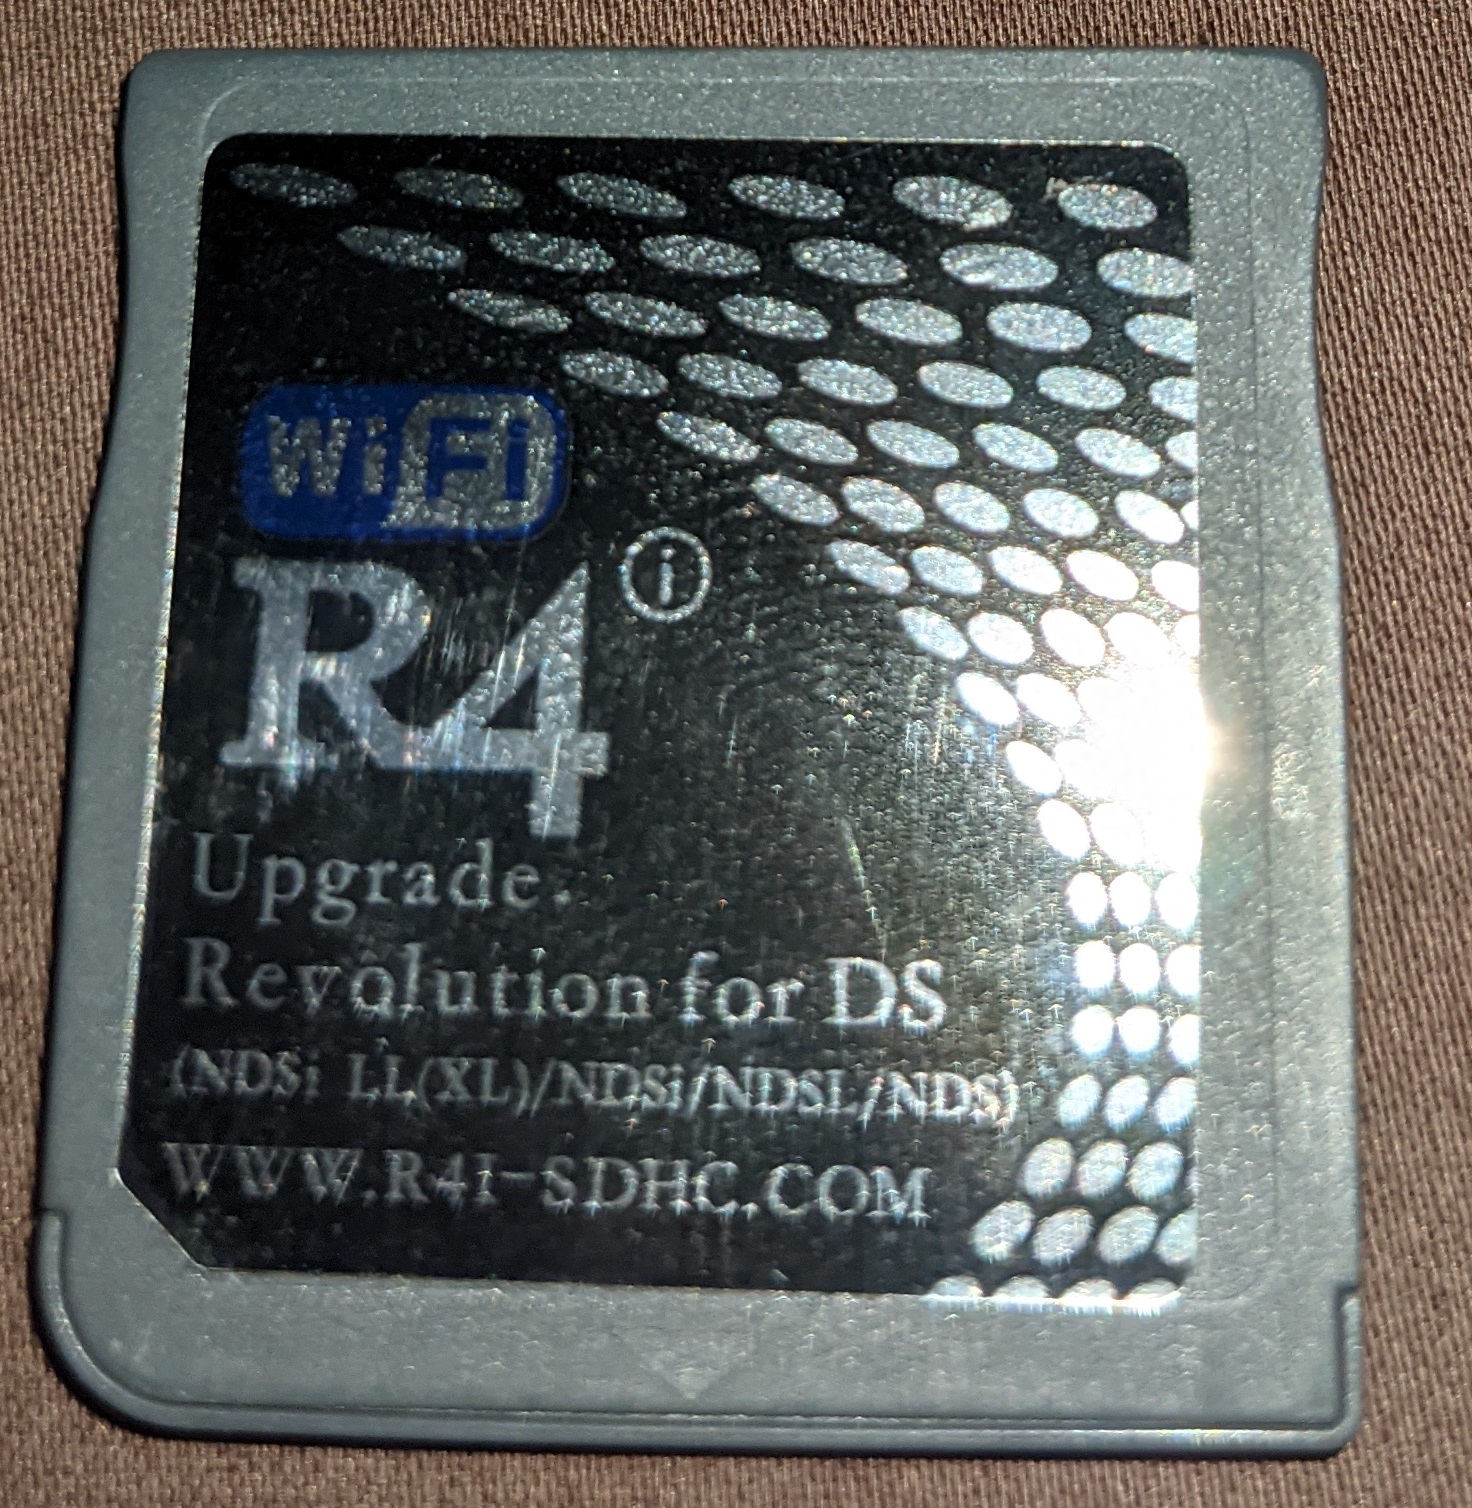 R4i-SDHC card not working anymore. Says "An Error Has Occured". How to fix  this? | GBAtemp.net - The Independent Video Game Community